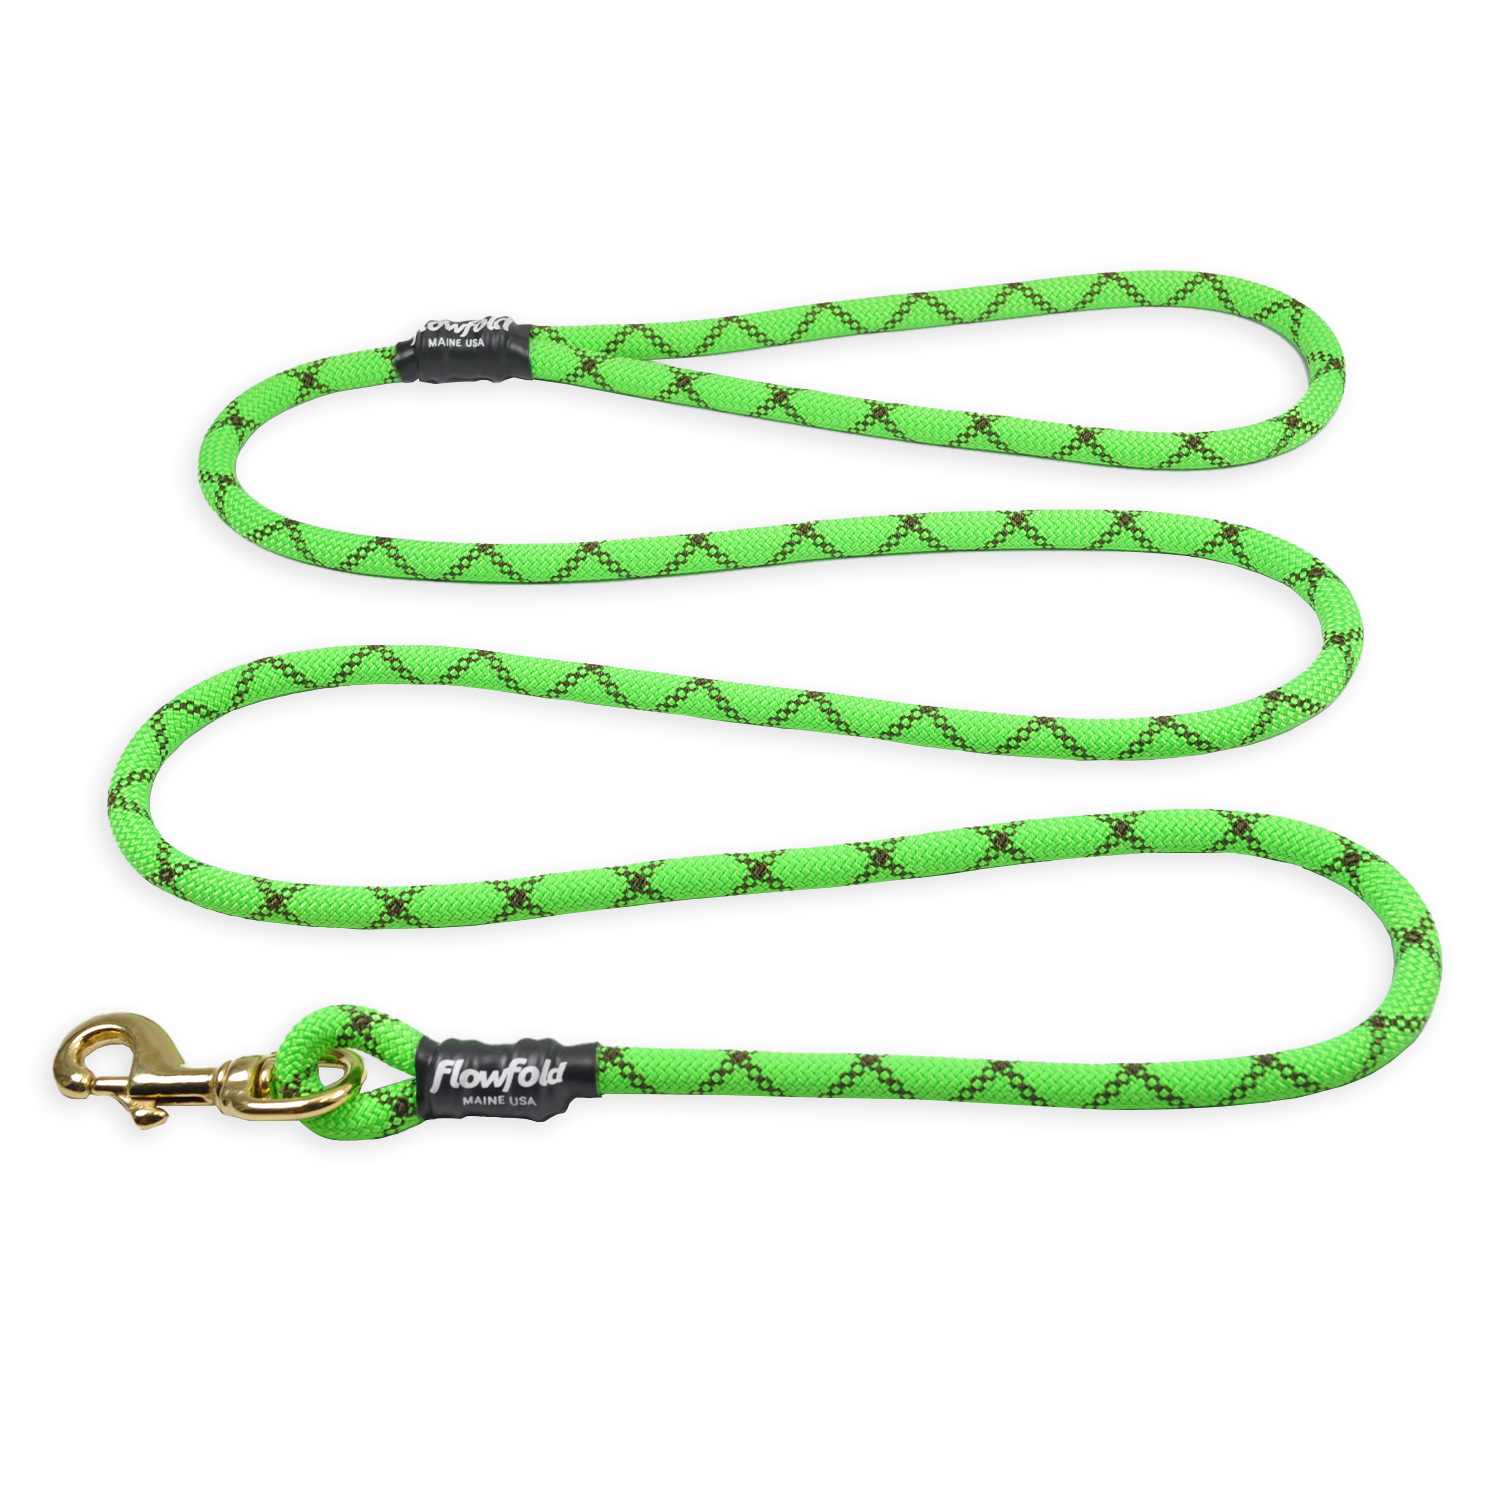 Flowfold Recycled Climbing Rope Dog Leash 6-Foot